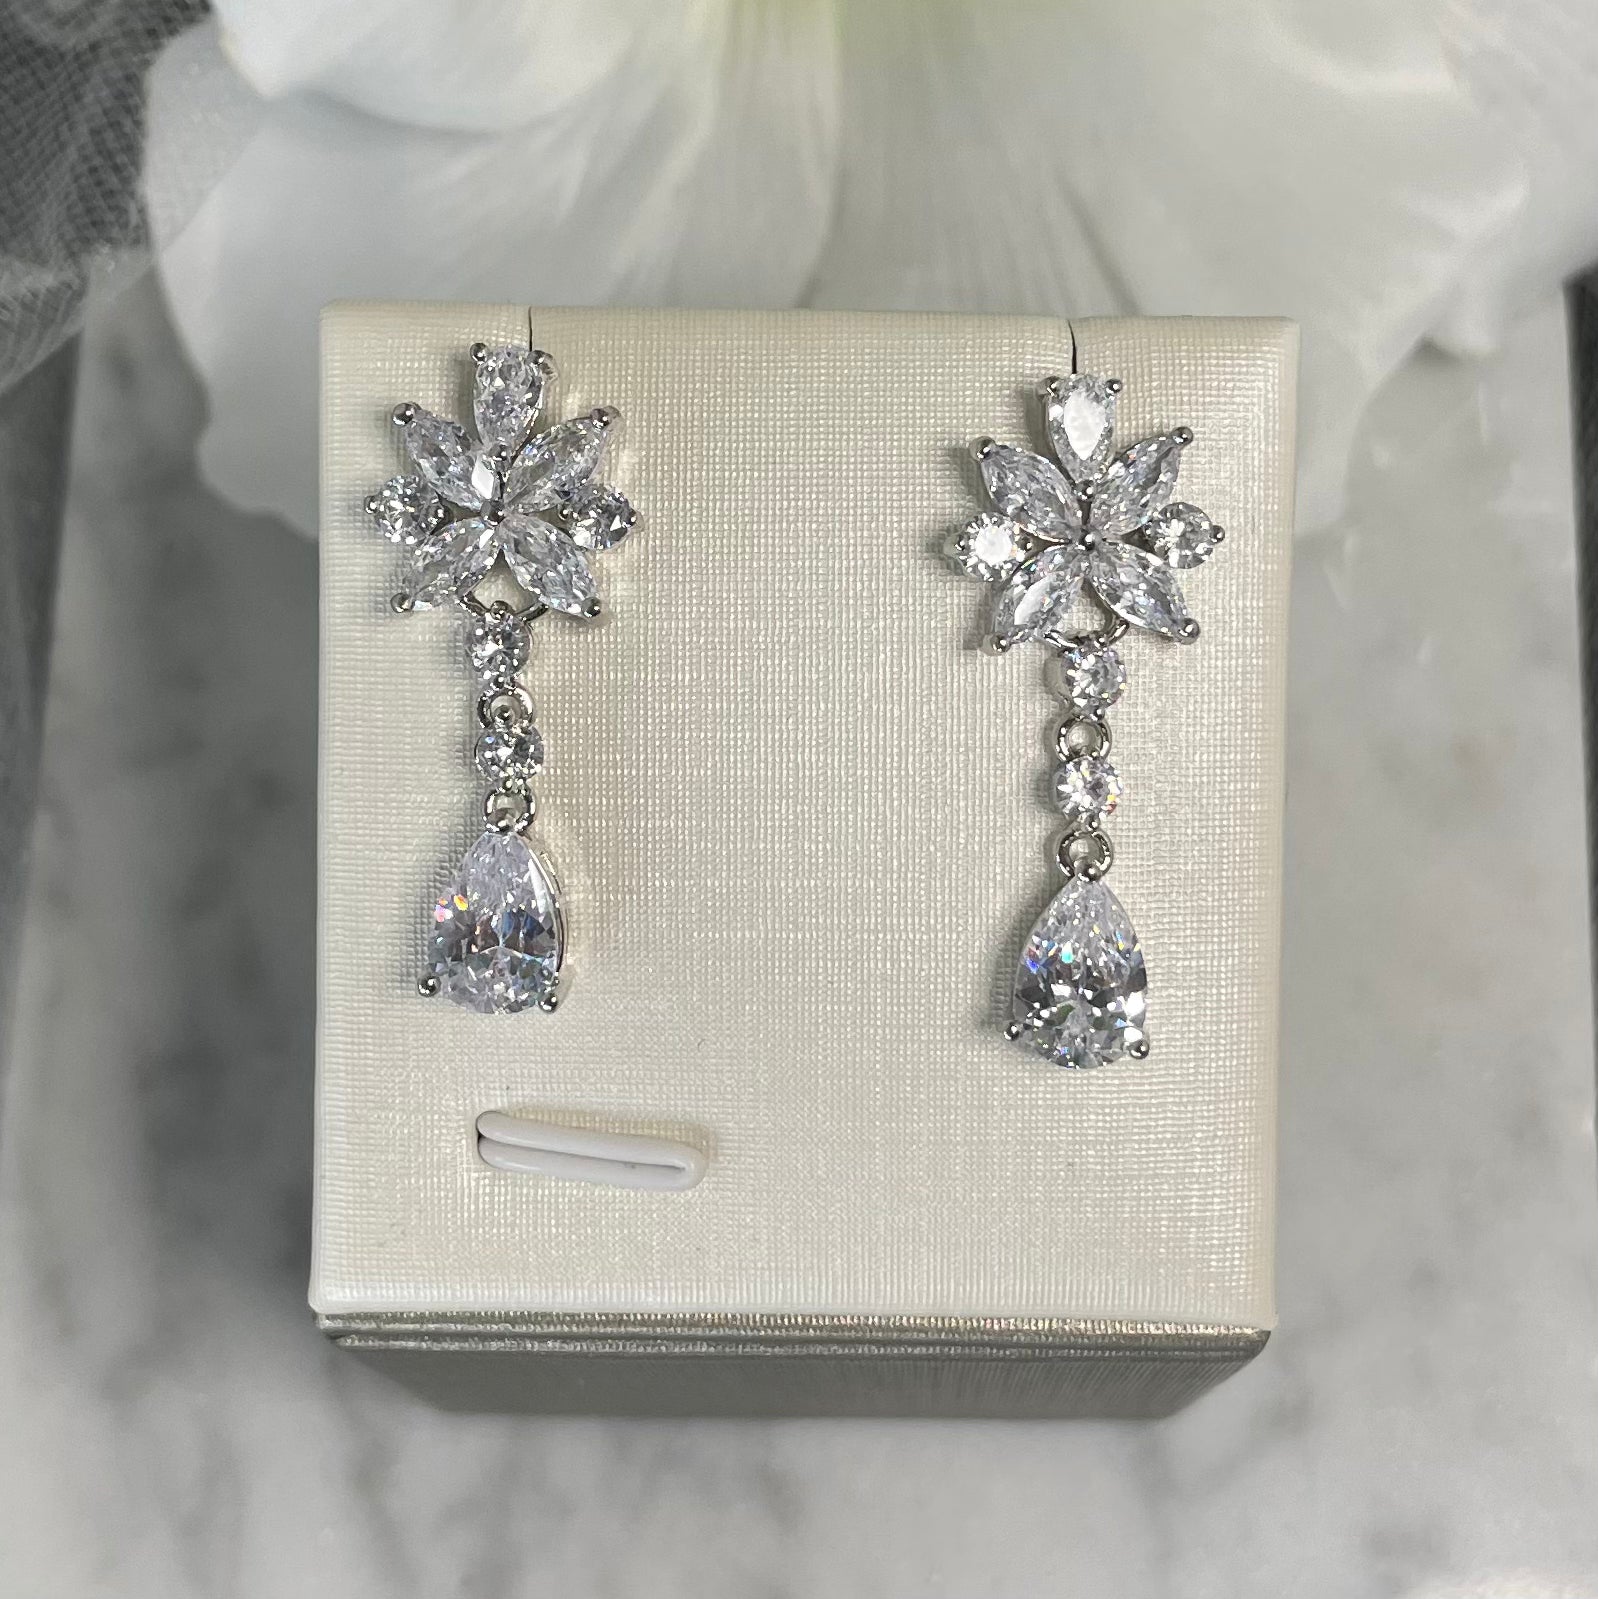 Christie cubic zirconia bridal earrings with a floral top, round crystals, and a teardrop finish, perfect for enhancing wedding day glamour.